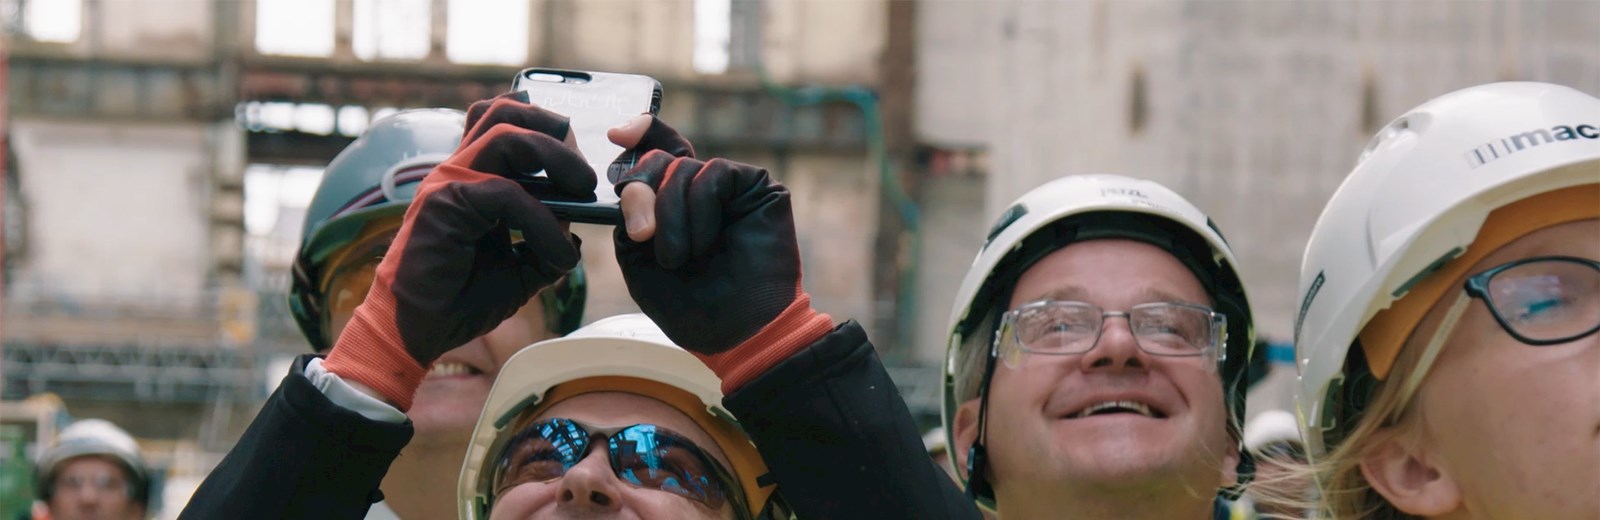 Mace Construction Worker Taking a Photo on his Phone - Mace Group